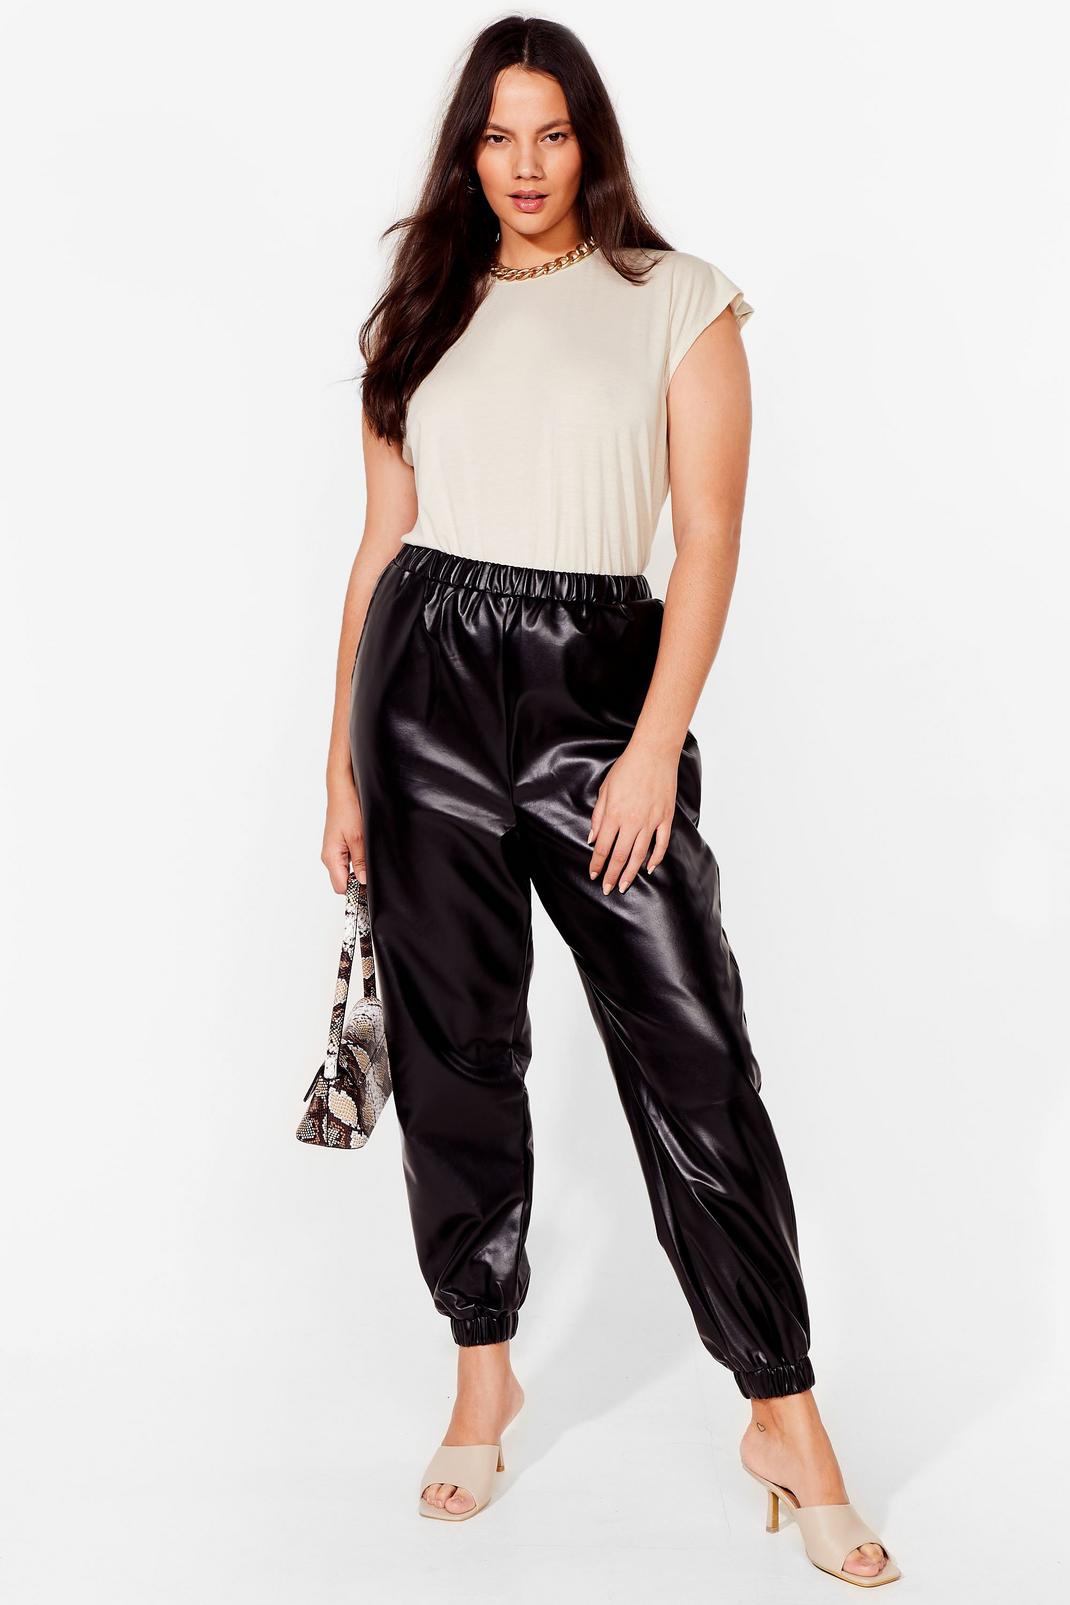 https://media.nastygal.com/i/nastygal/agg42537_black_xl/female-black-all-i-faux-leather-wanted-plus-size-jogger-trousers/?w=1070&qlt=default&fmt.jp2.qlt=70&fmt=auto&sm=fit